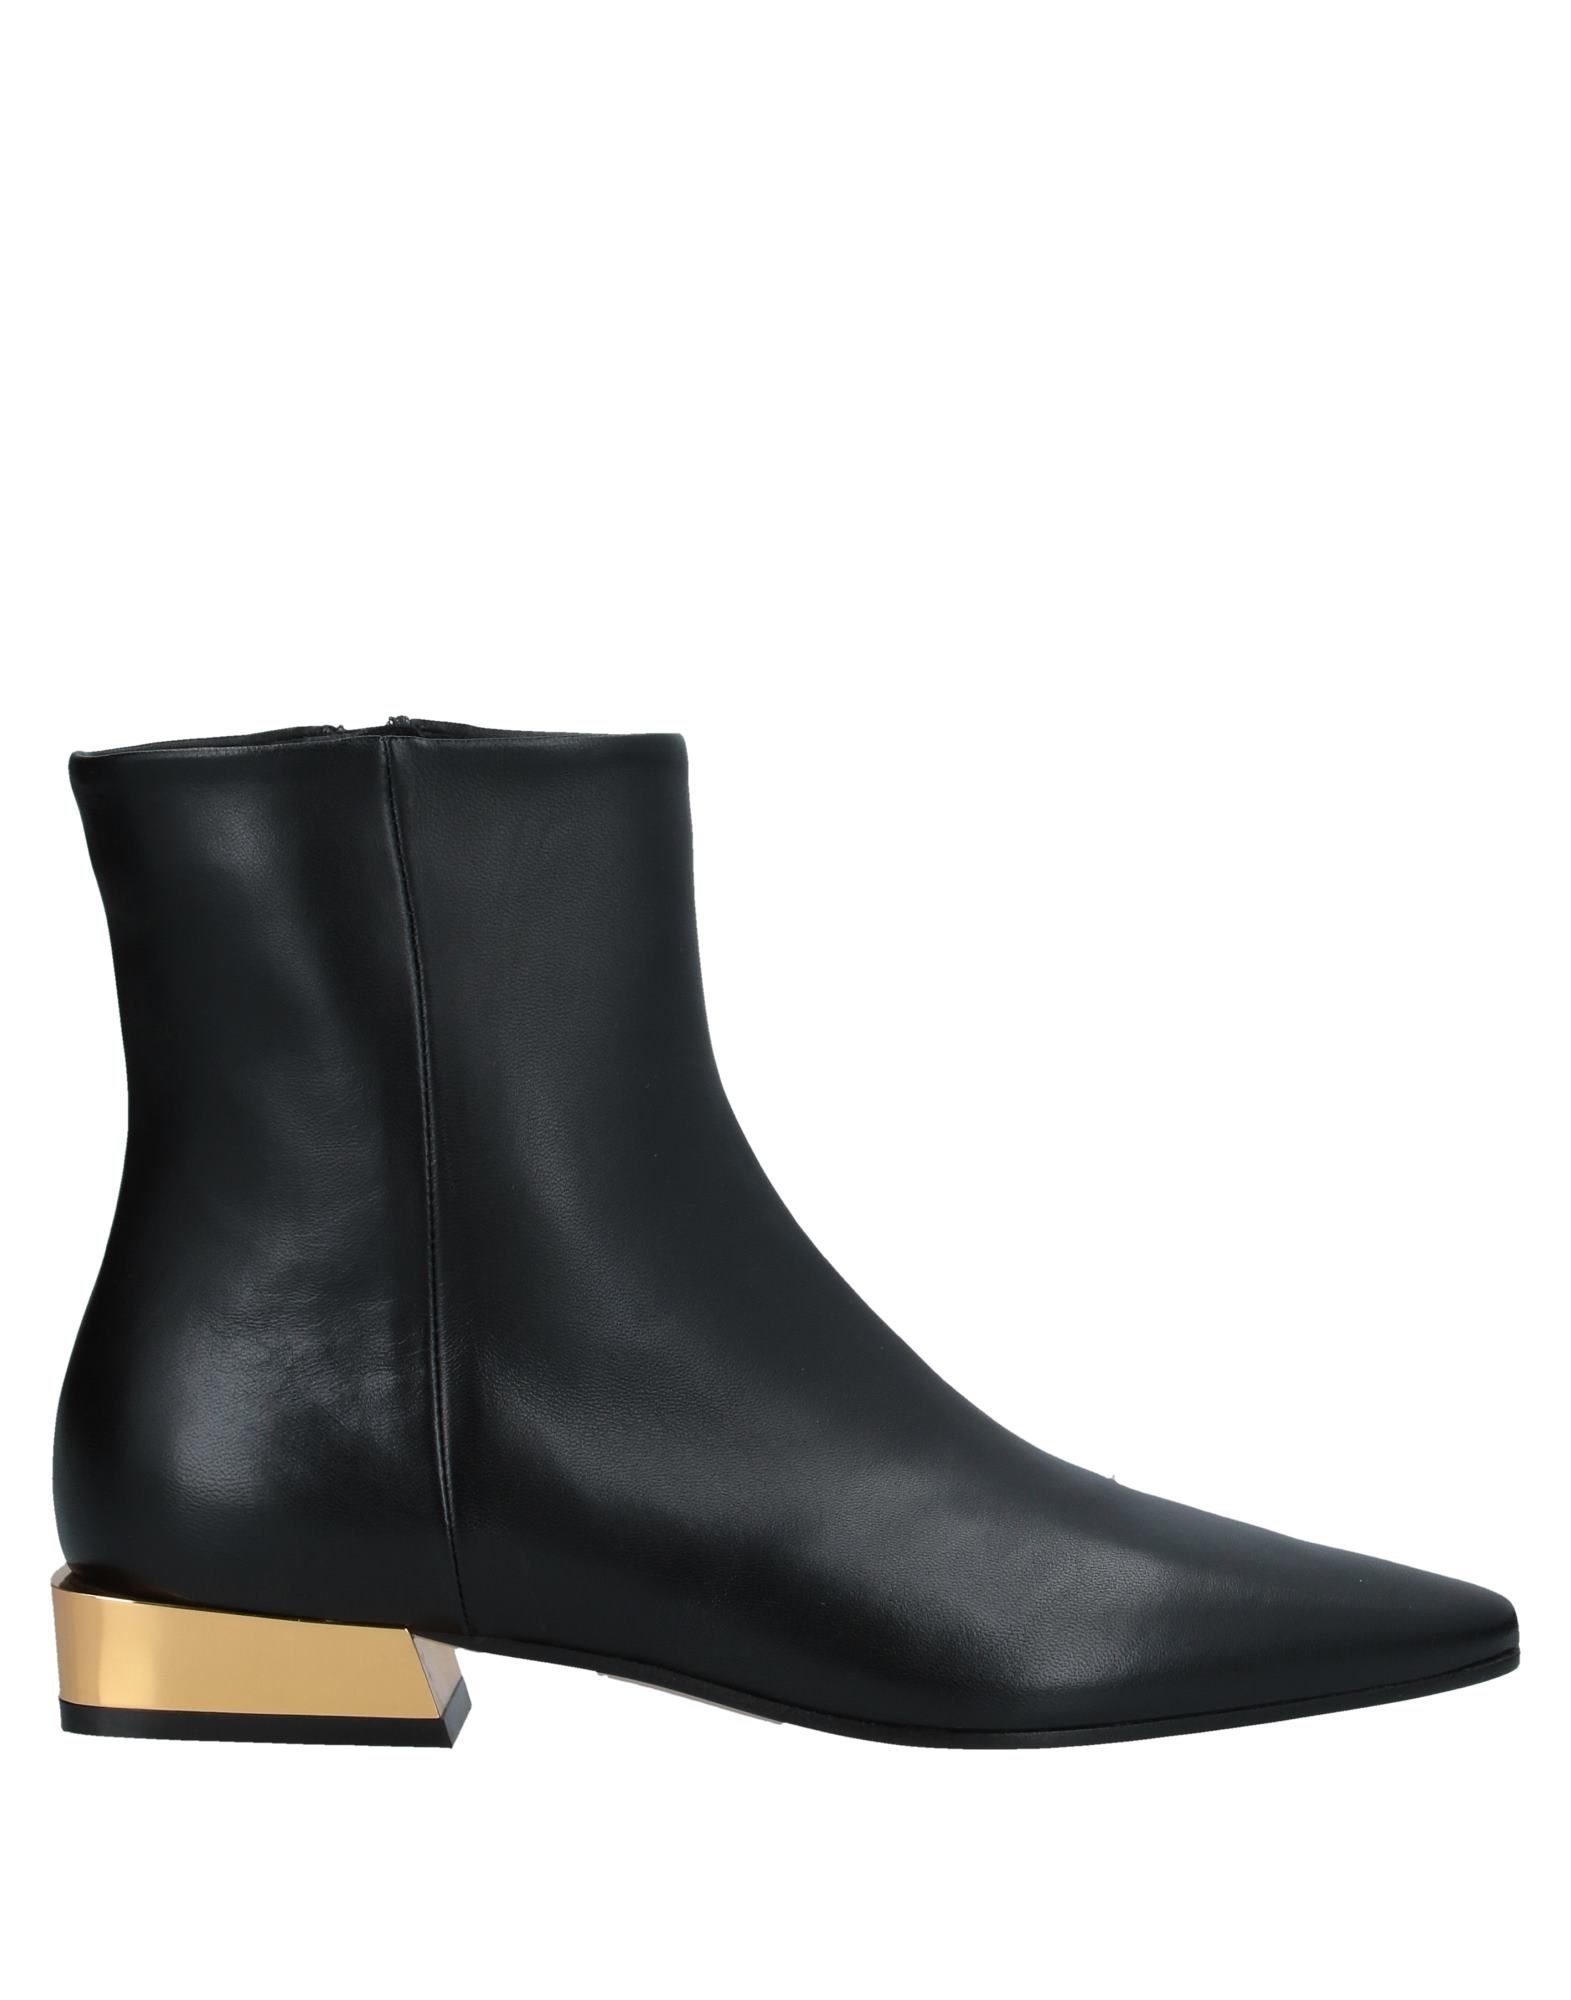 LERRE Ankle boots - Item 11889888